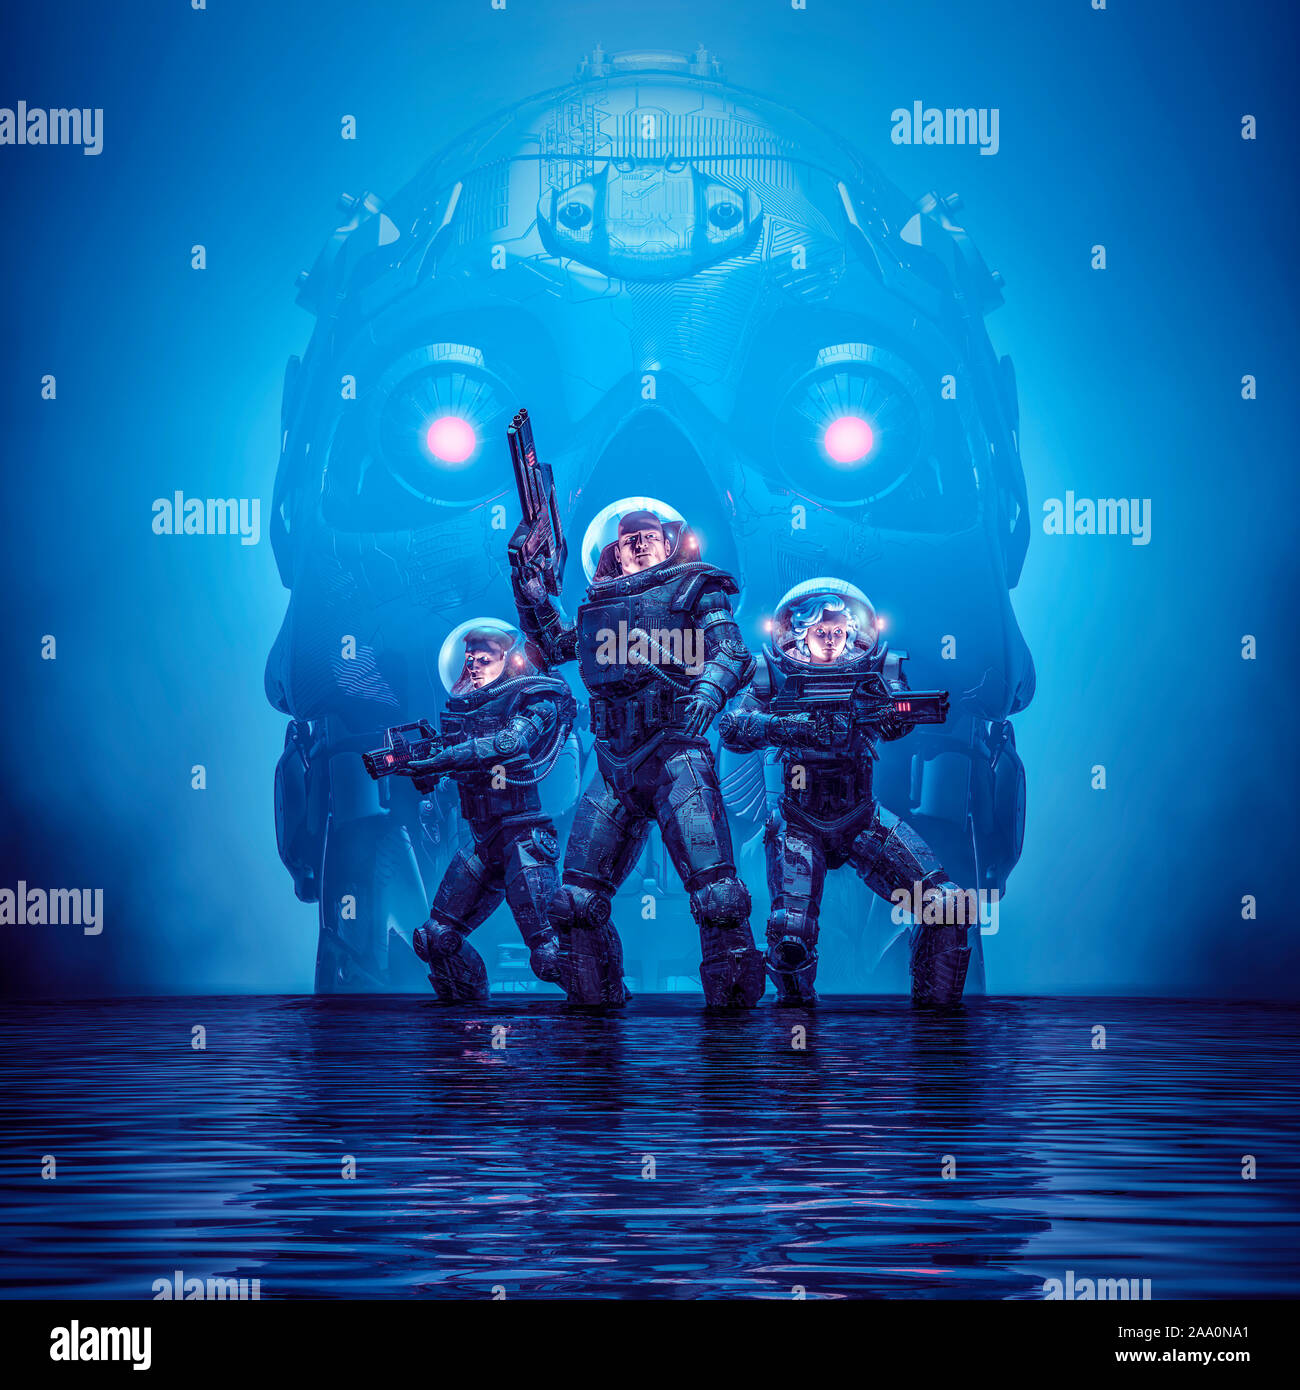 Search party of doom / 3D illustration of science fiction scene showing heroic space marine astronauts with looming giant robot skull in dark watery e Stock Photo